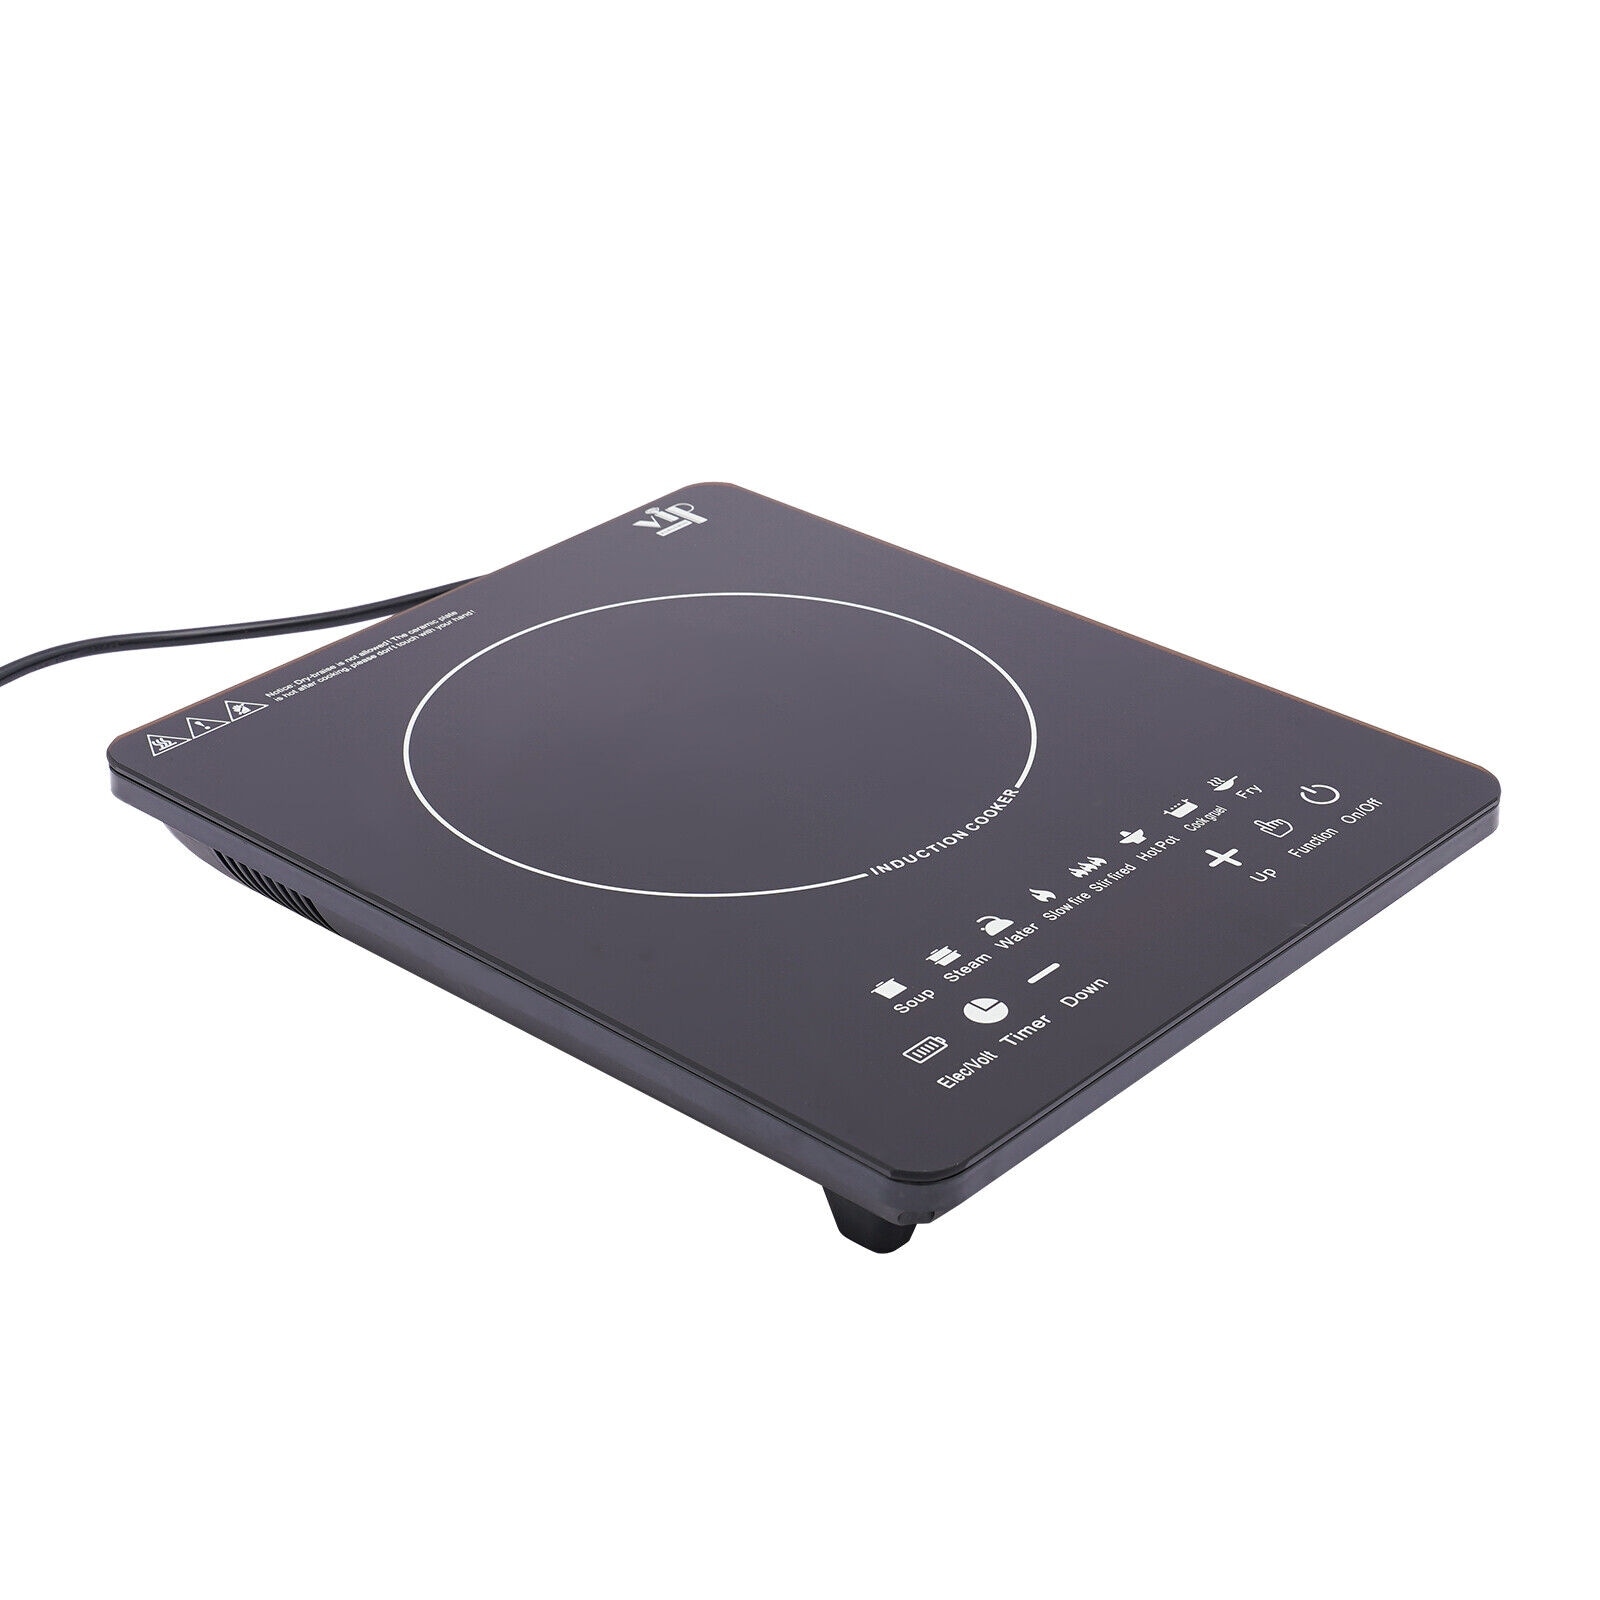 https://ak1.ostkcdn.com/images/products/is/images/direct/80aab0b7510019716186c97d911ed5c09ffd3819/Portable-2200W-Induction-Cooktop-for-Kitchen-Countertop%22.jpg